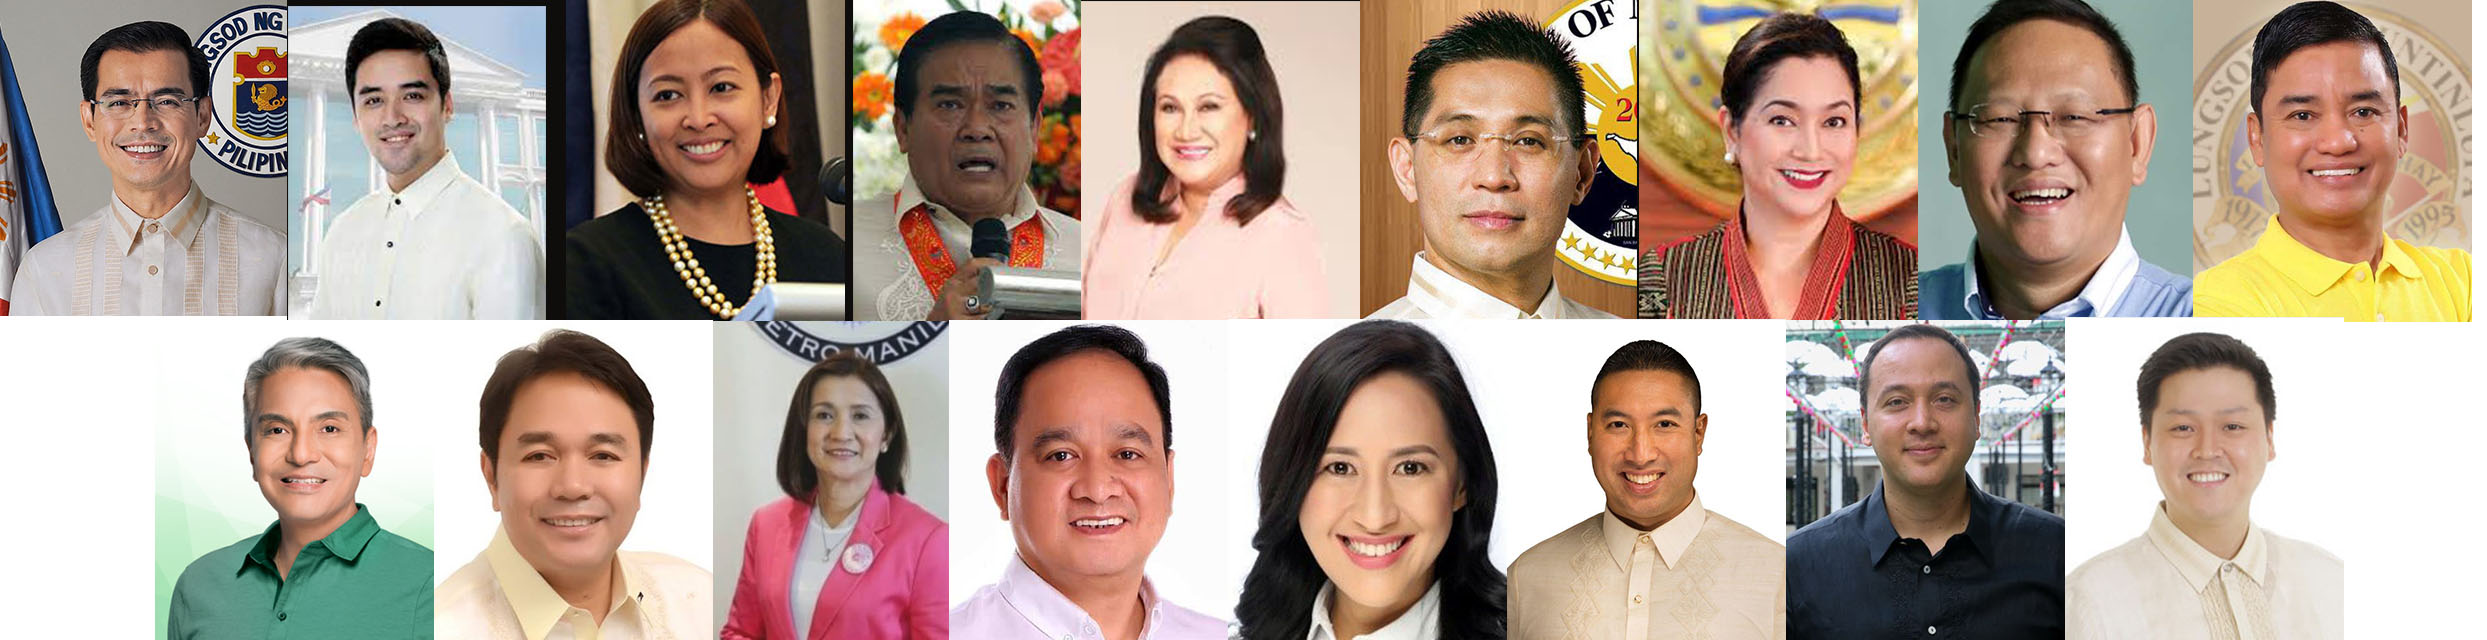 Who do you think is the best performing Metro Manila Mayor?